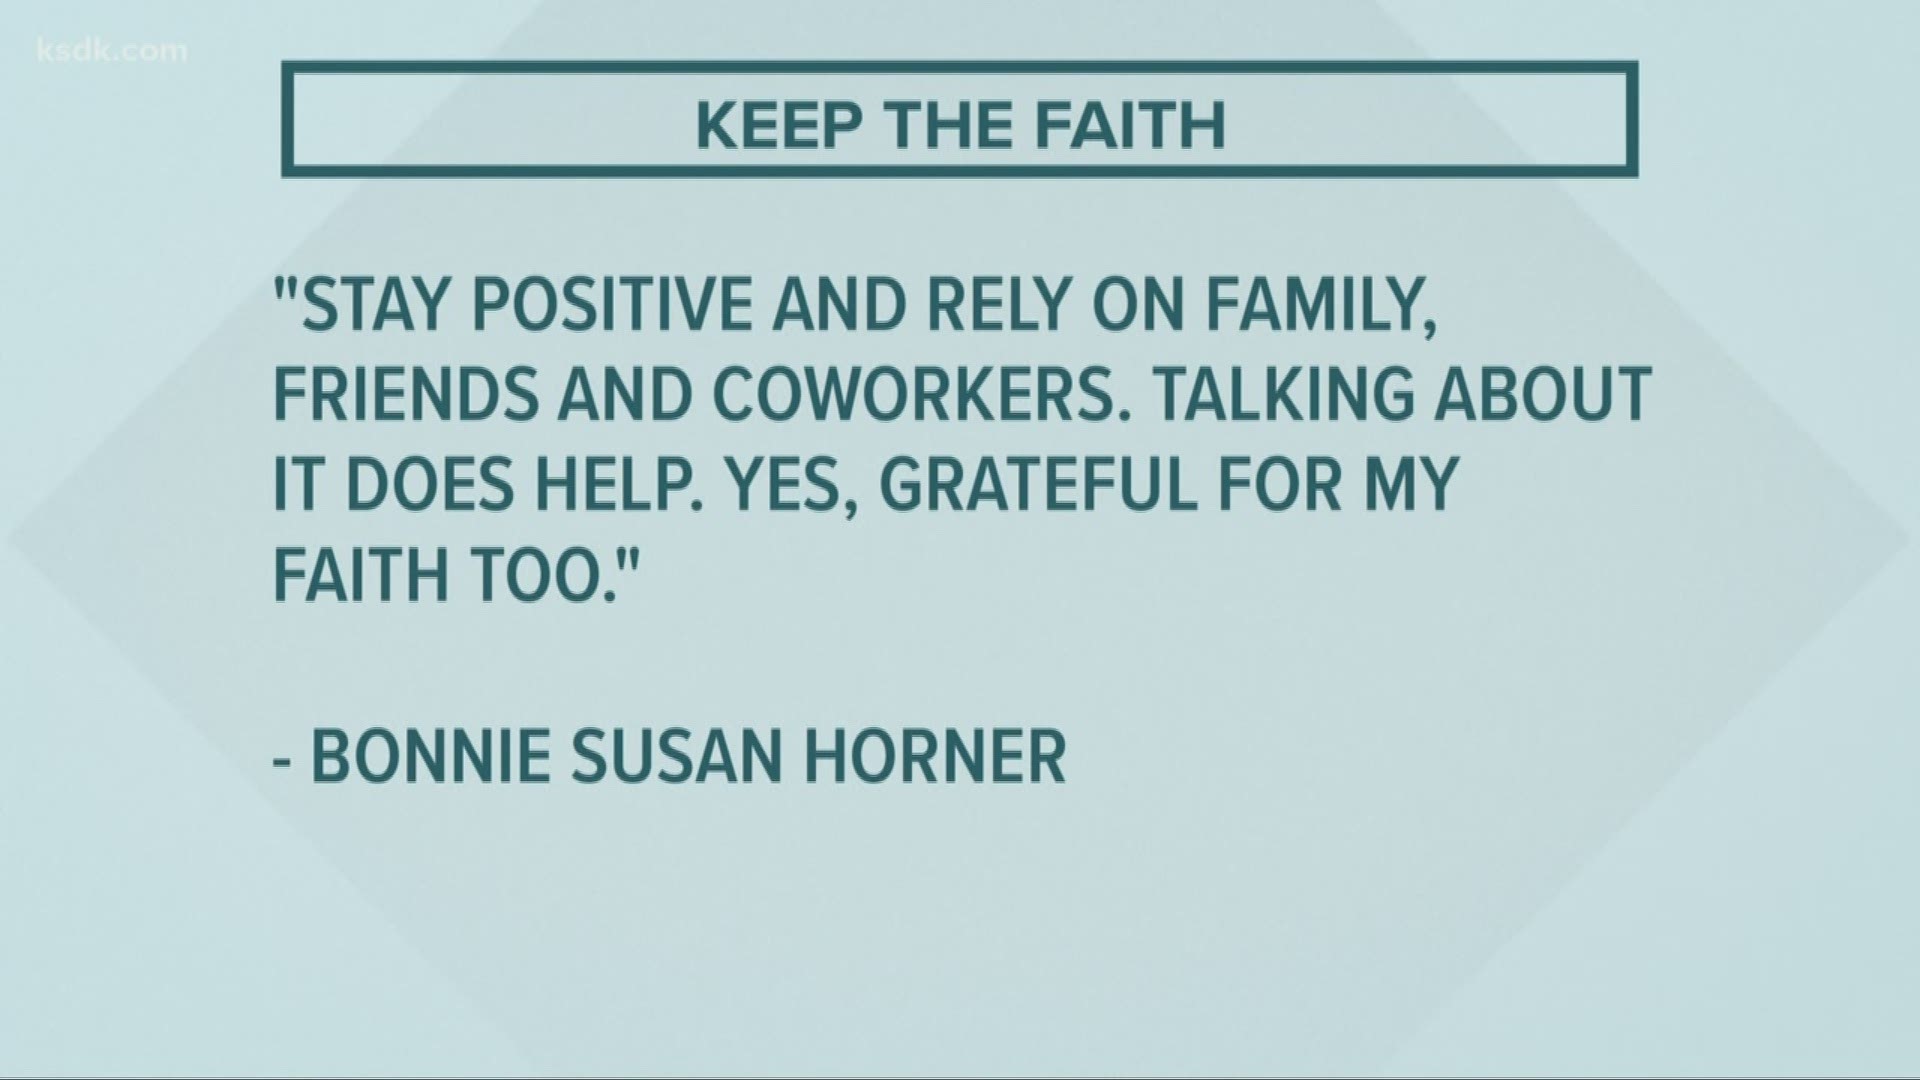 5 On Your Side's Rene Knott shares positive messages of support people wrote to him on Facebook.